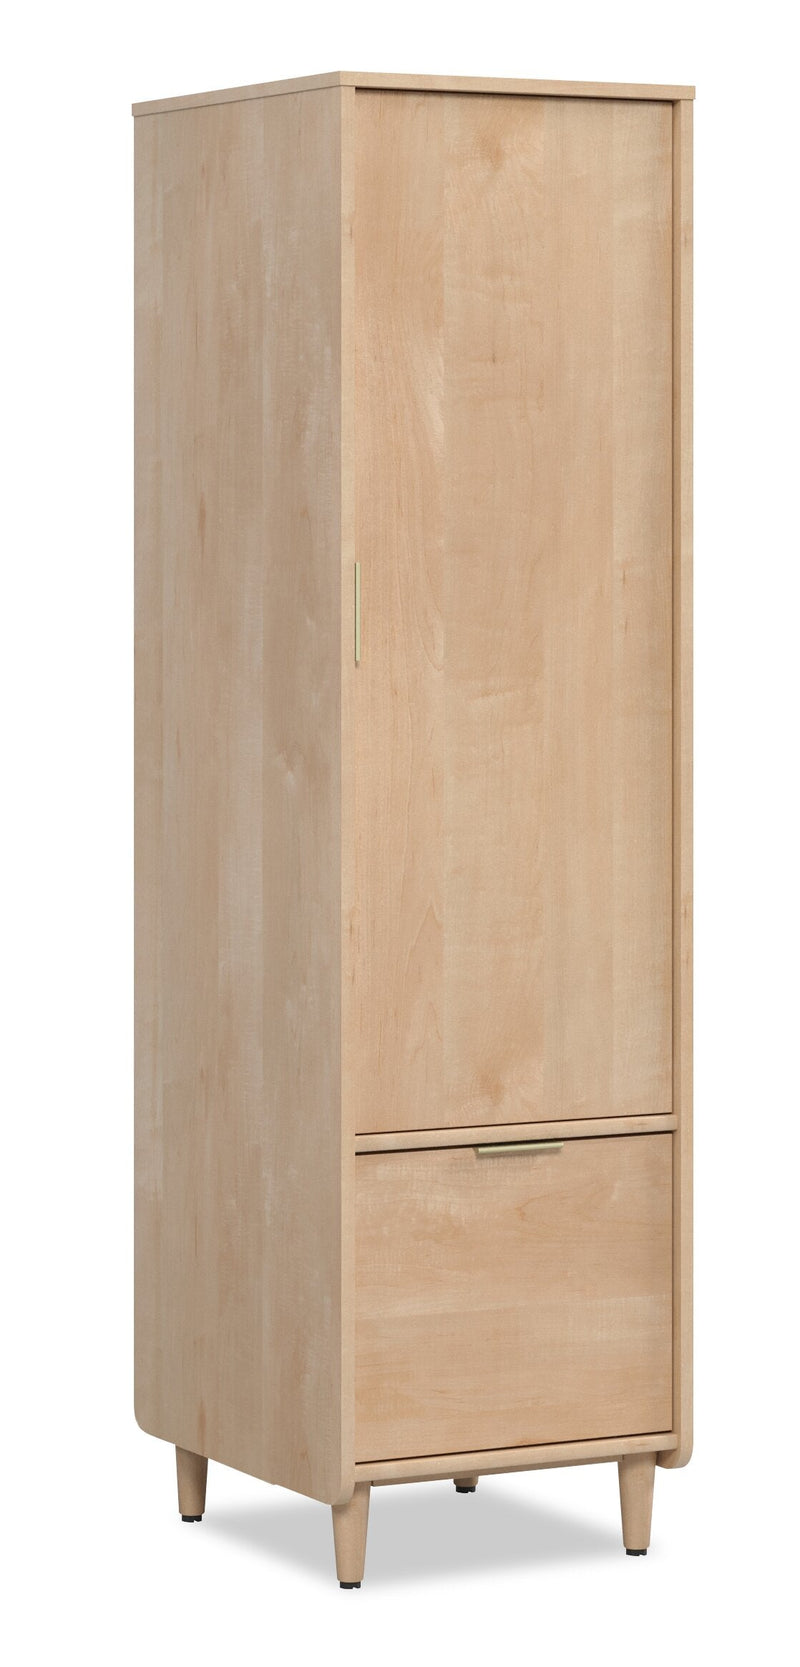 Beacon Hill Commercial Grade Storage Cabinet - Natural Maple